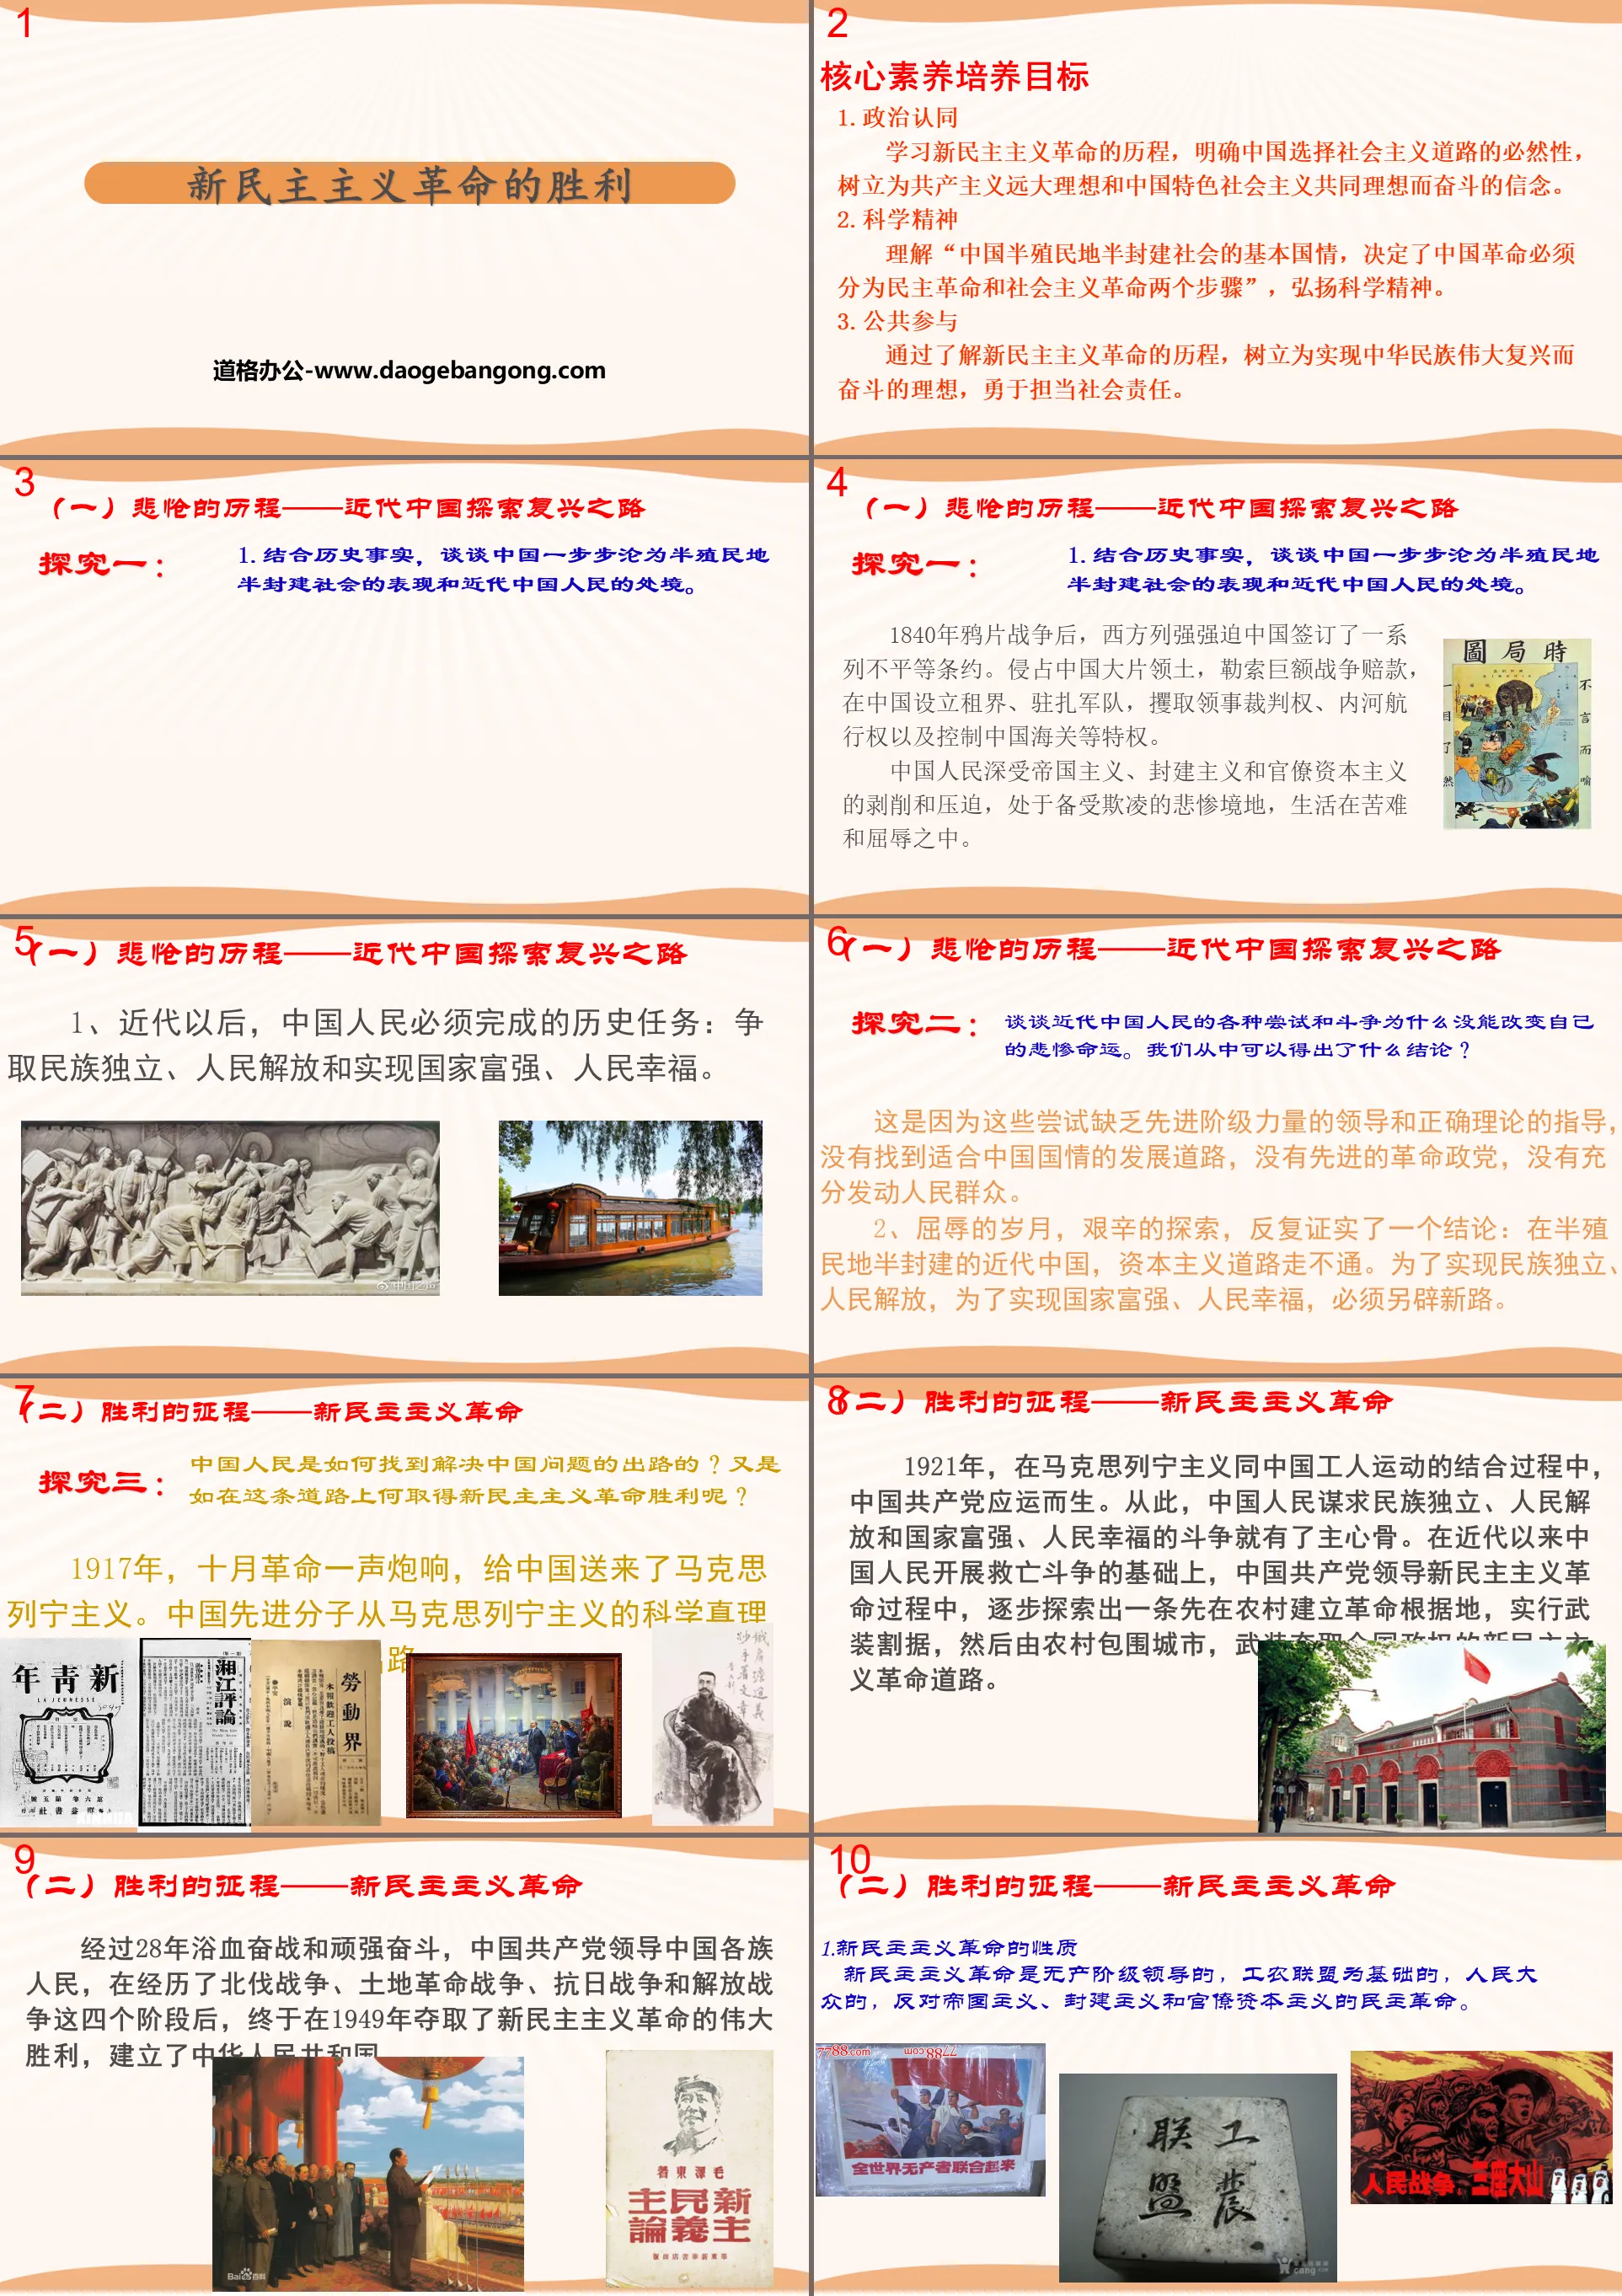 "The Victory of the New Democratic Revolution" Only Socialism Can Save China PPT Free Courseware